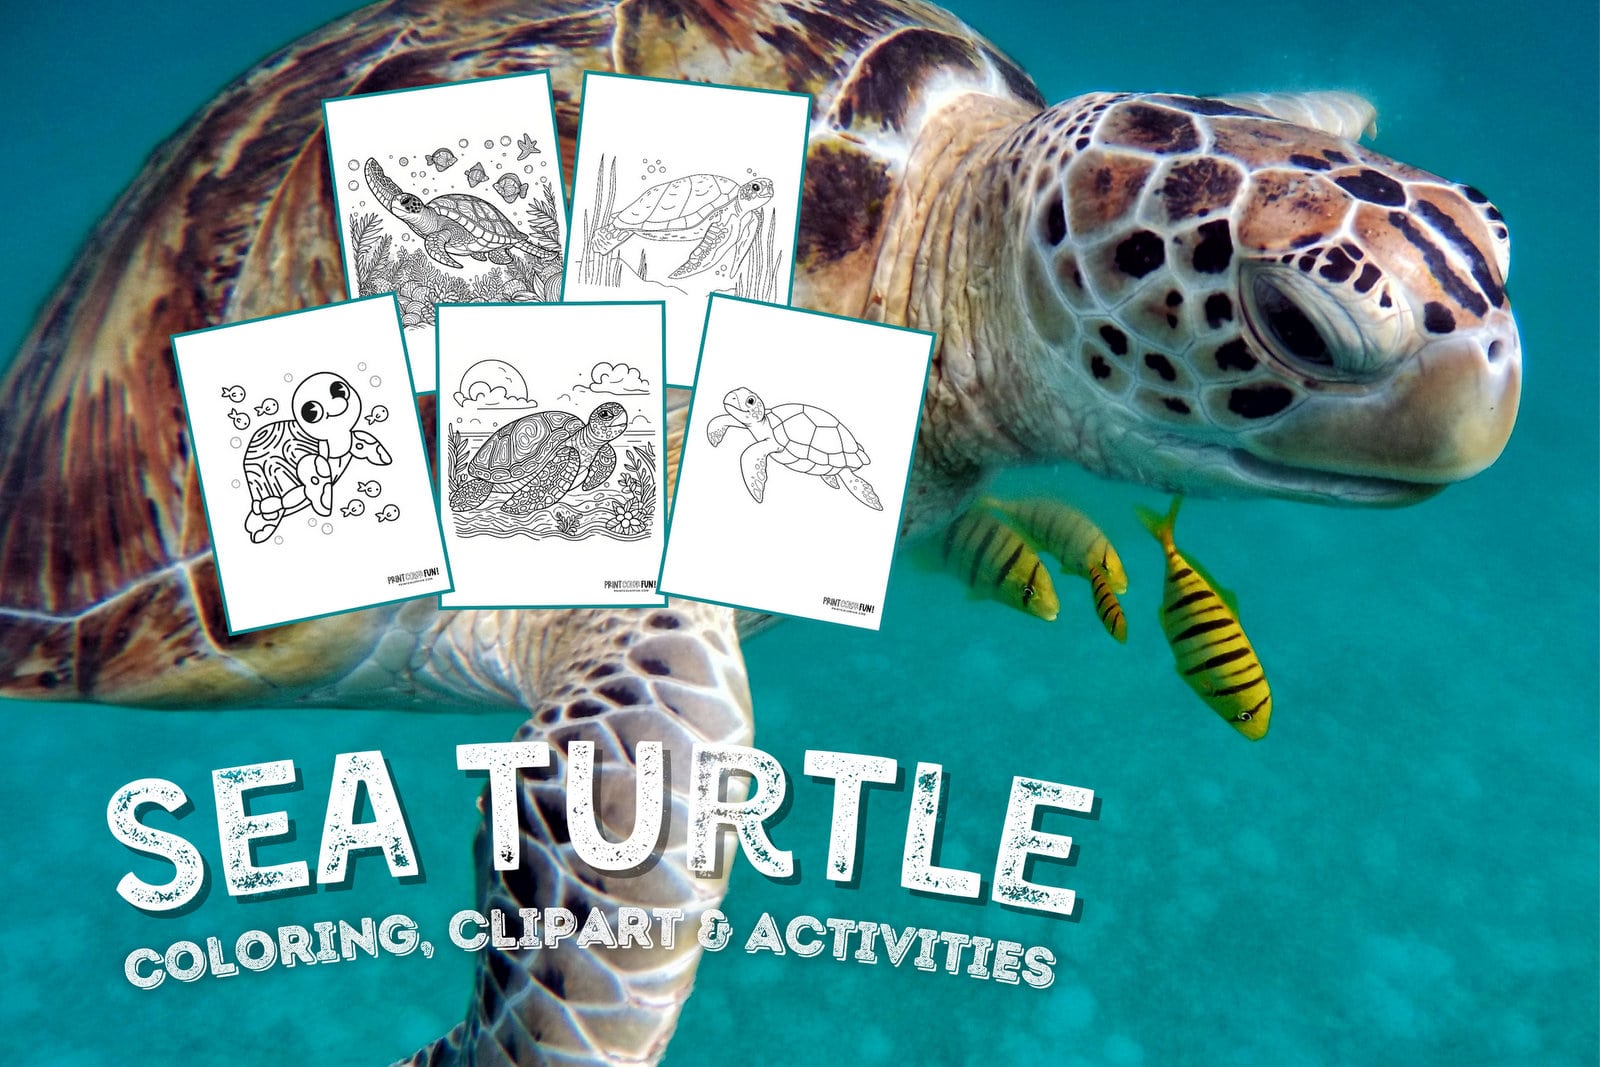 Sea turtle coloring page clipart activities from PrintColorFun com